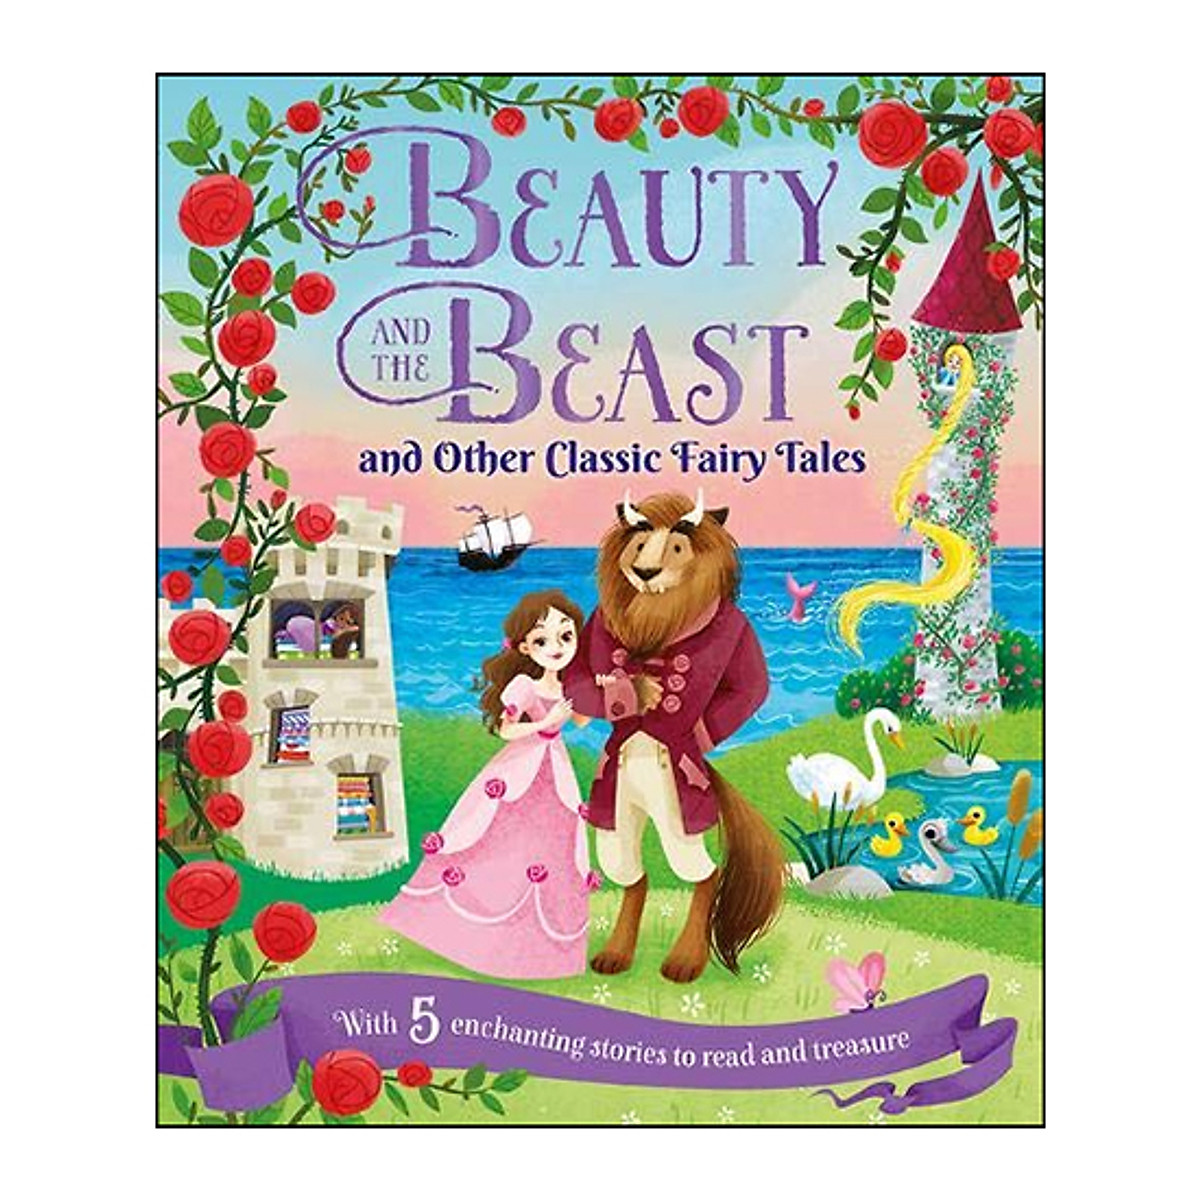 Beauty and the Beast and Other Classic Fairy Tales (5 Enchanting Stories To Read And Treasure)